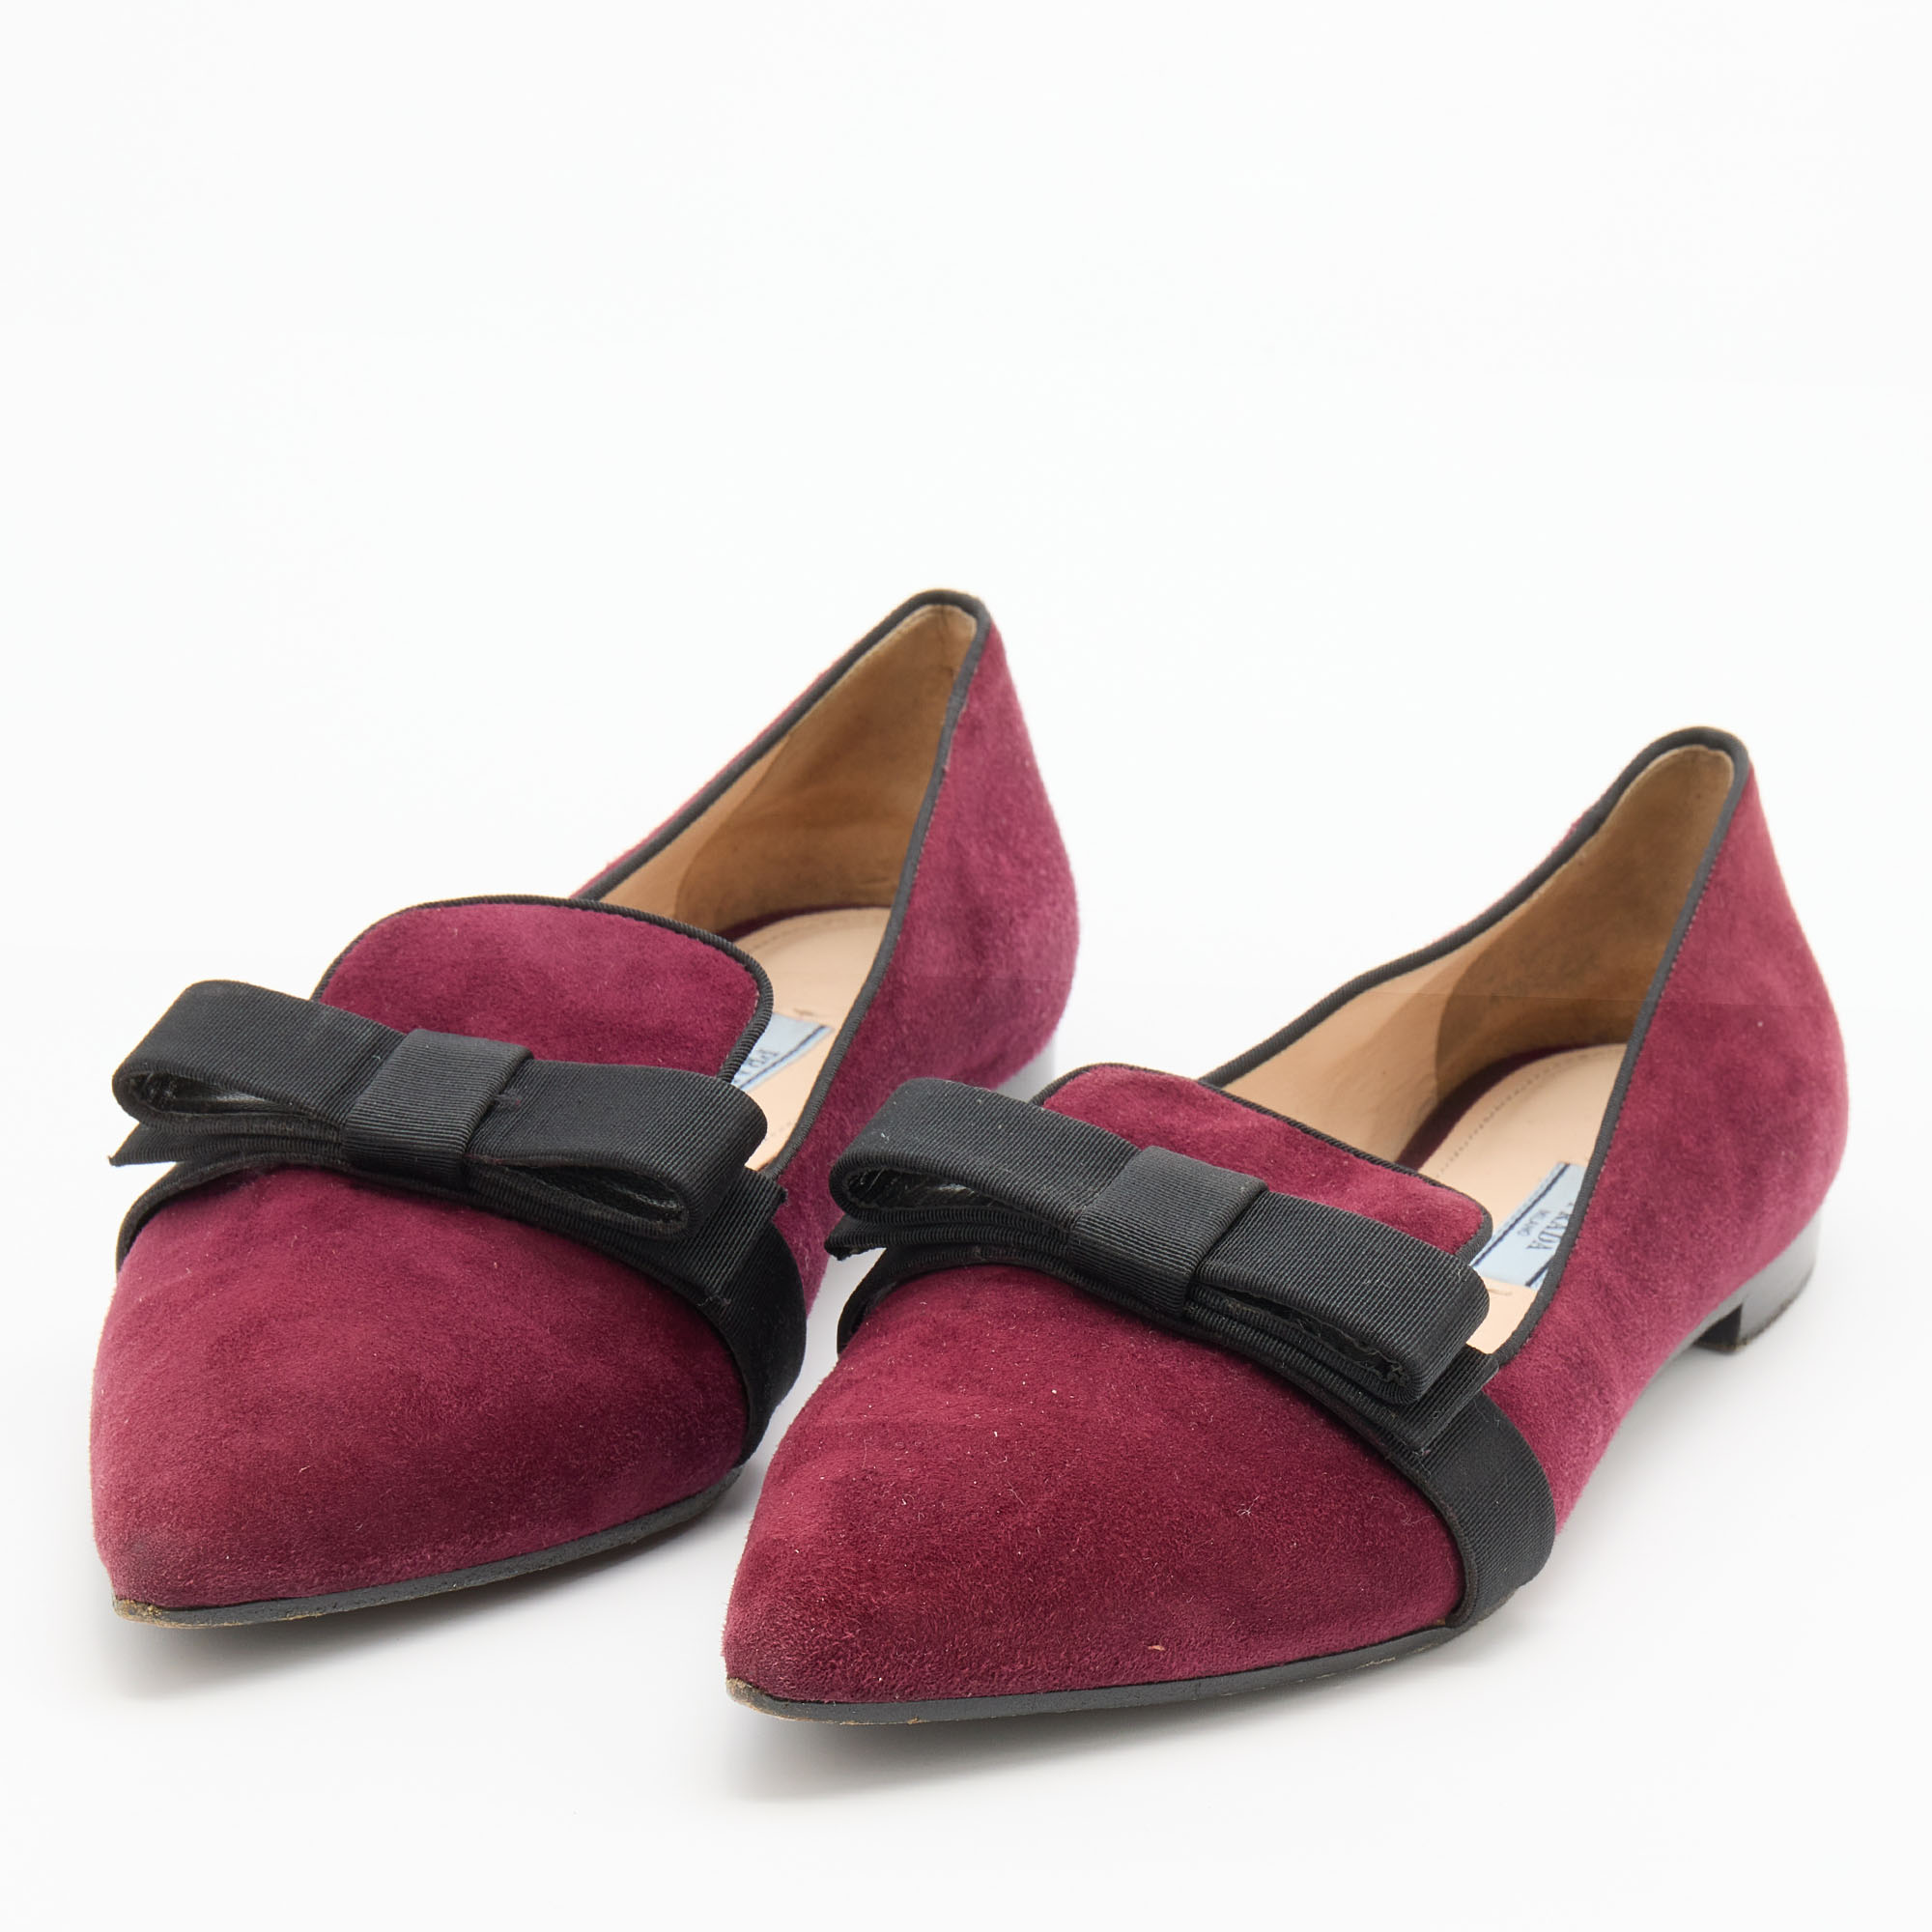 

Prada Burgundy/Black Suede and Fabric Bow Pointed Toe Smoking Slippers Size